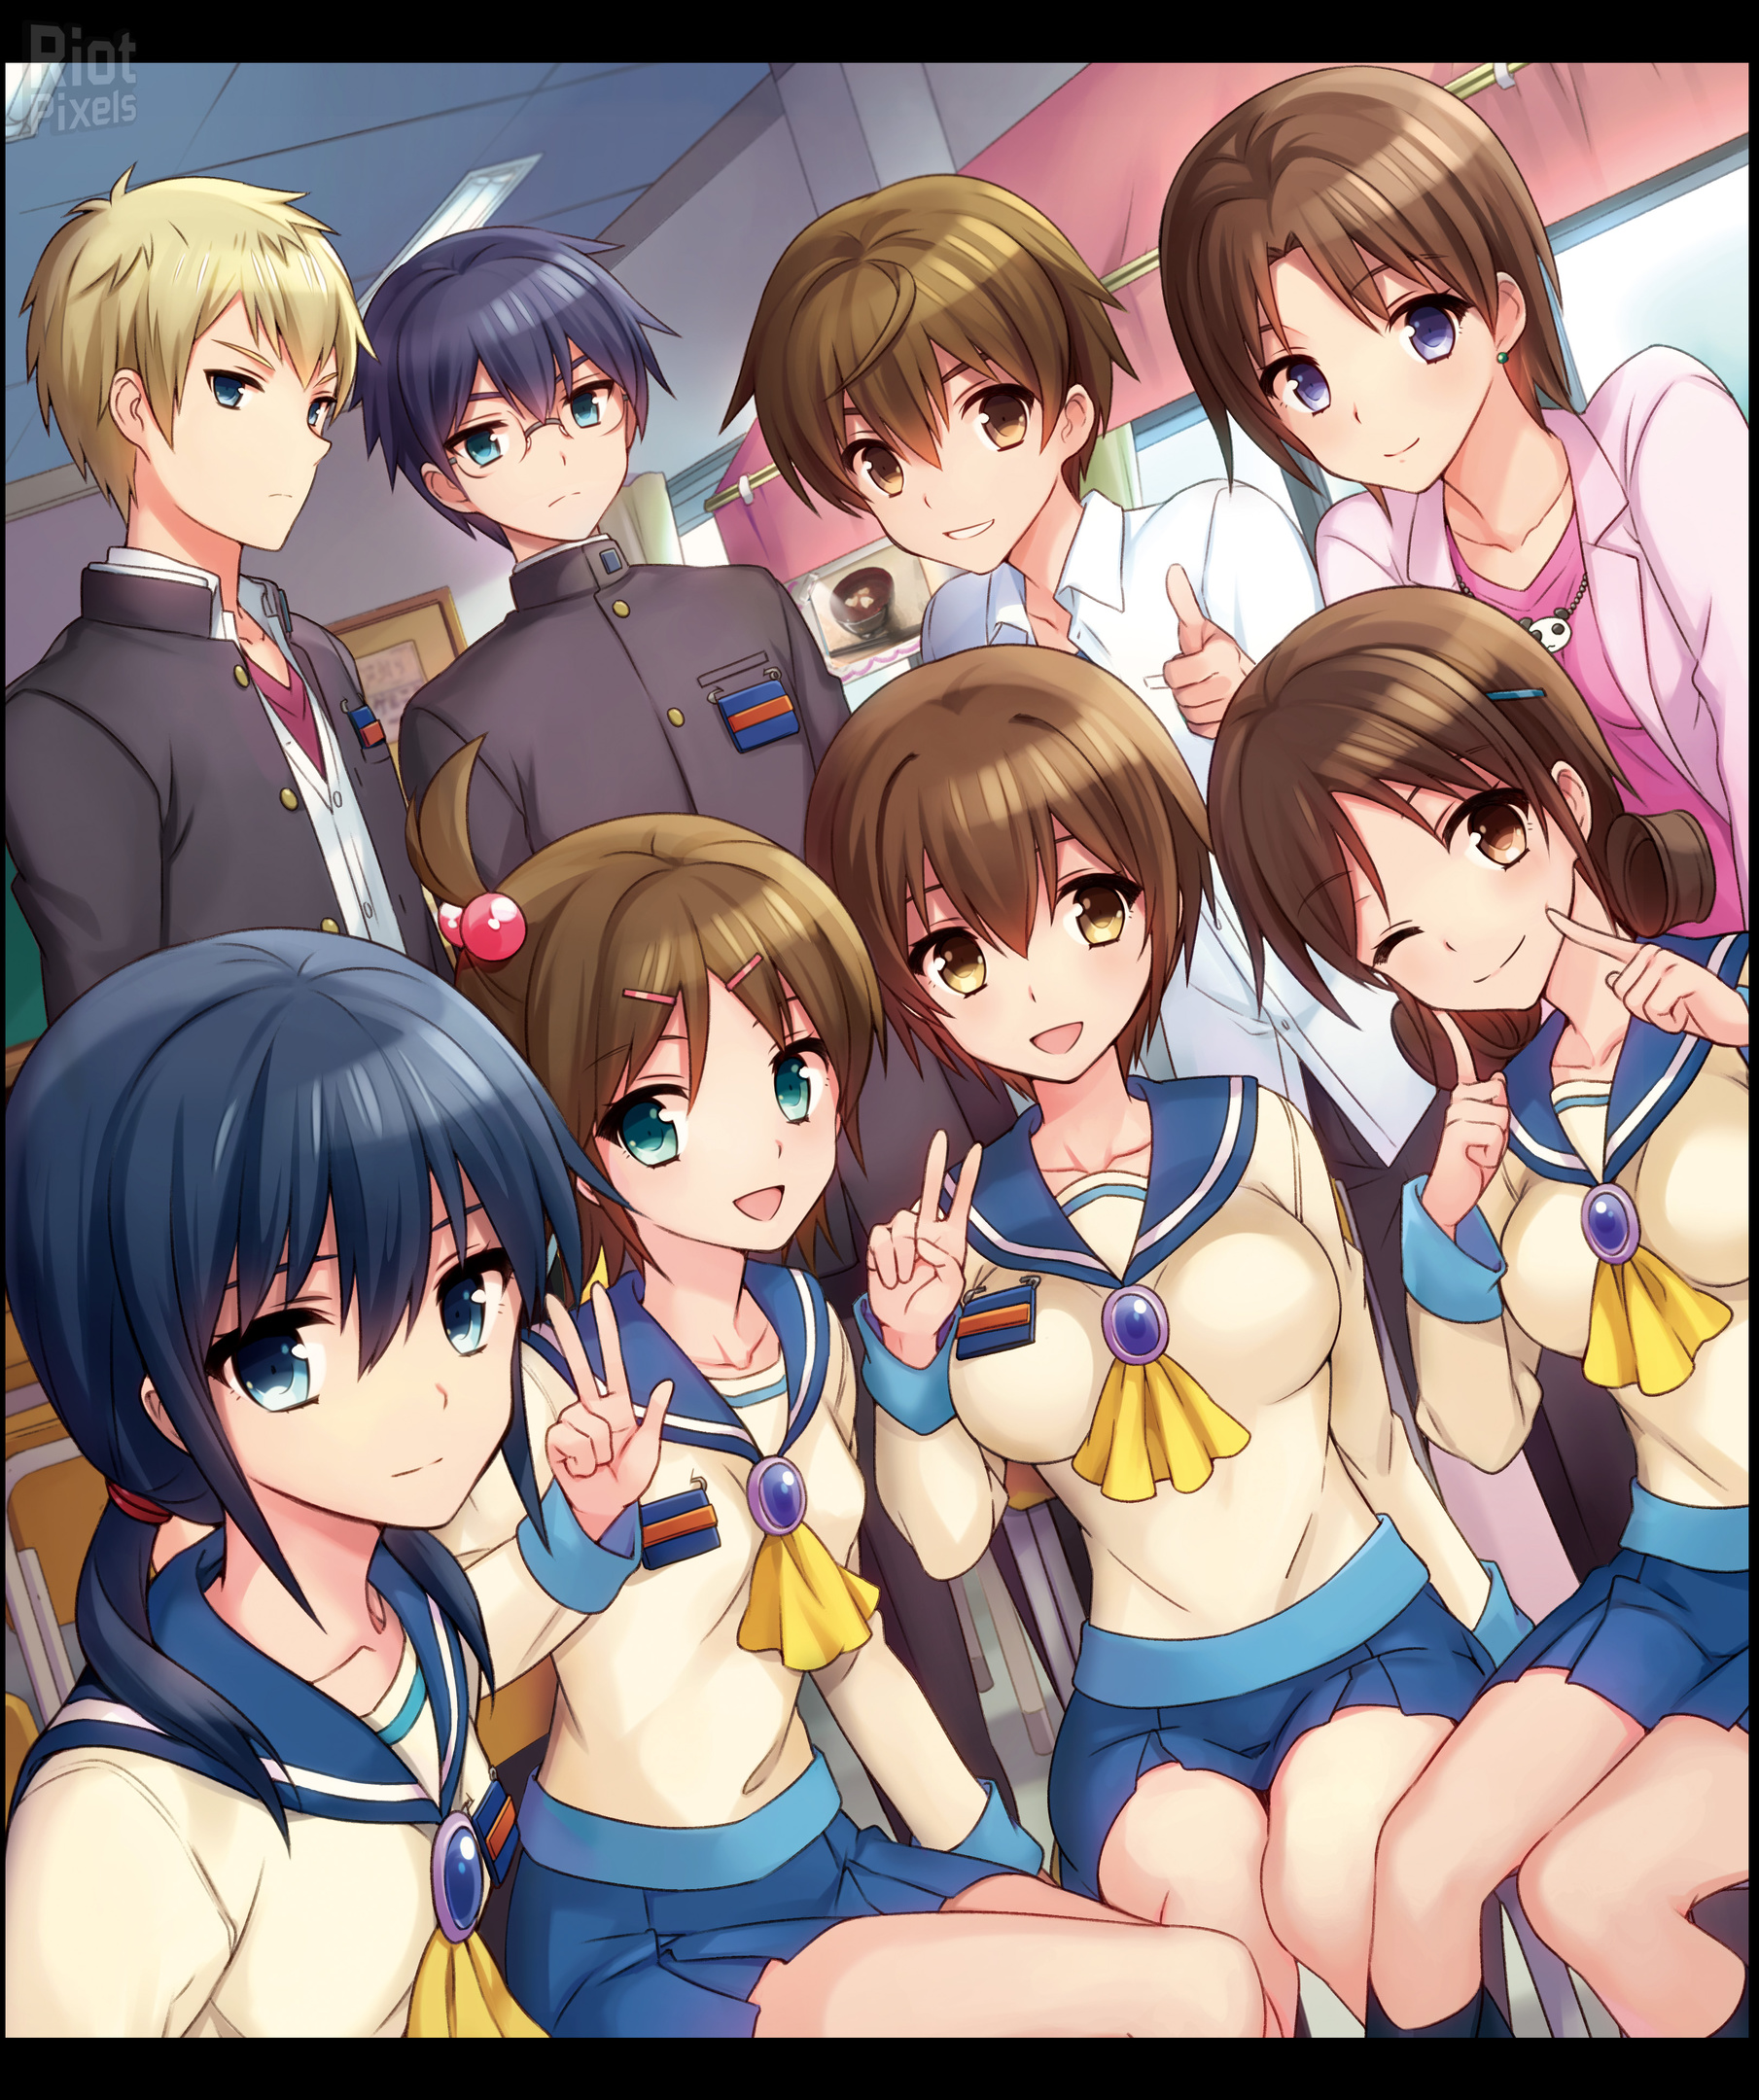 Corpse Party Blood Drive Cover